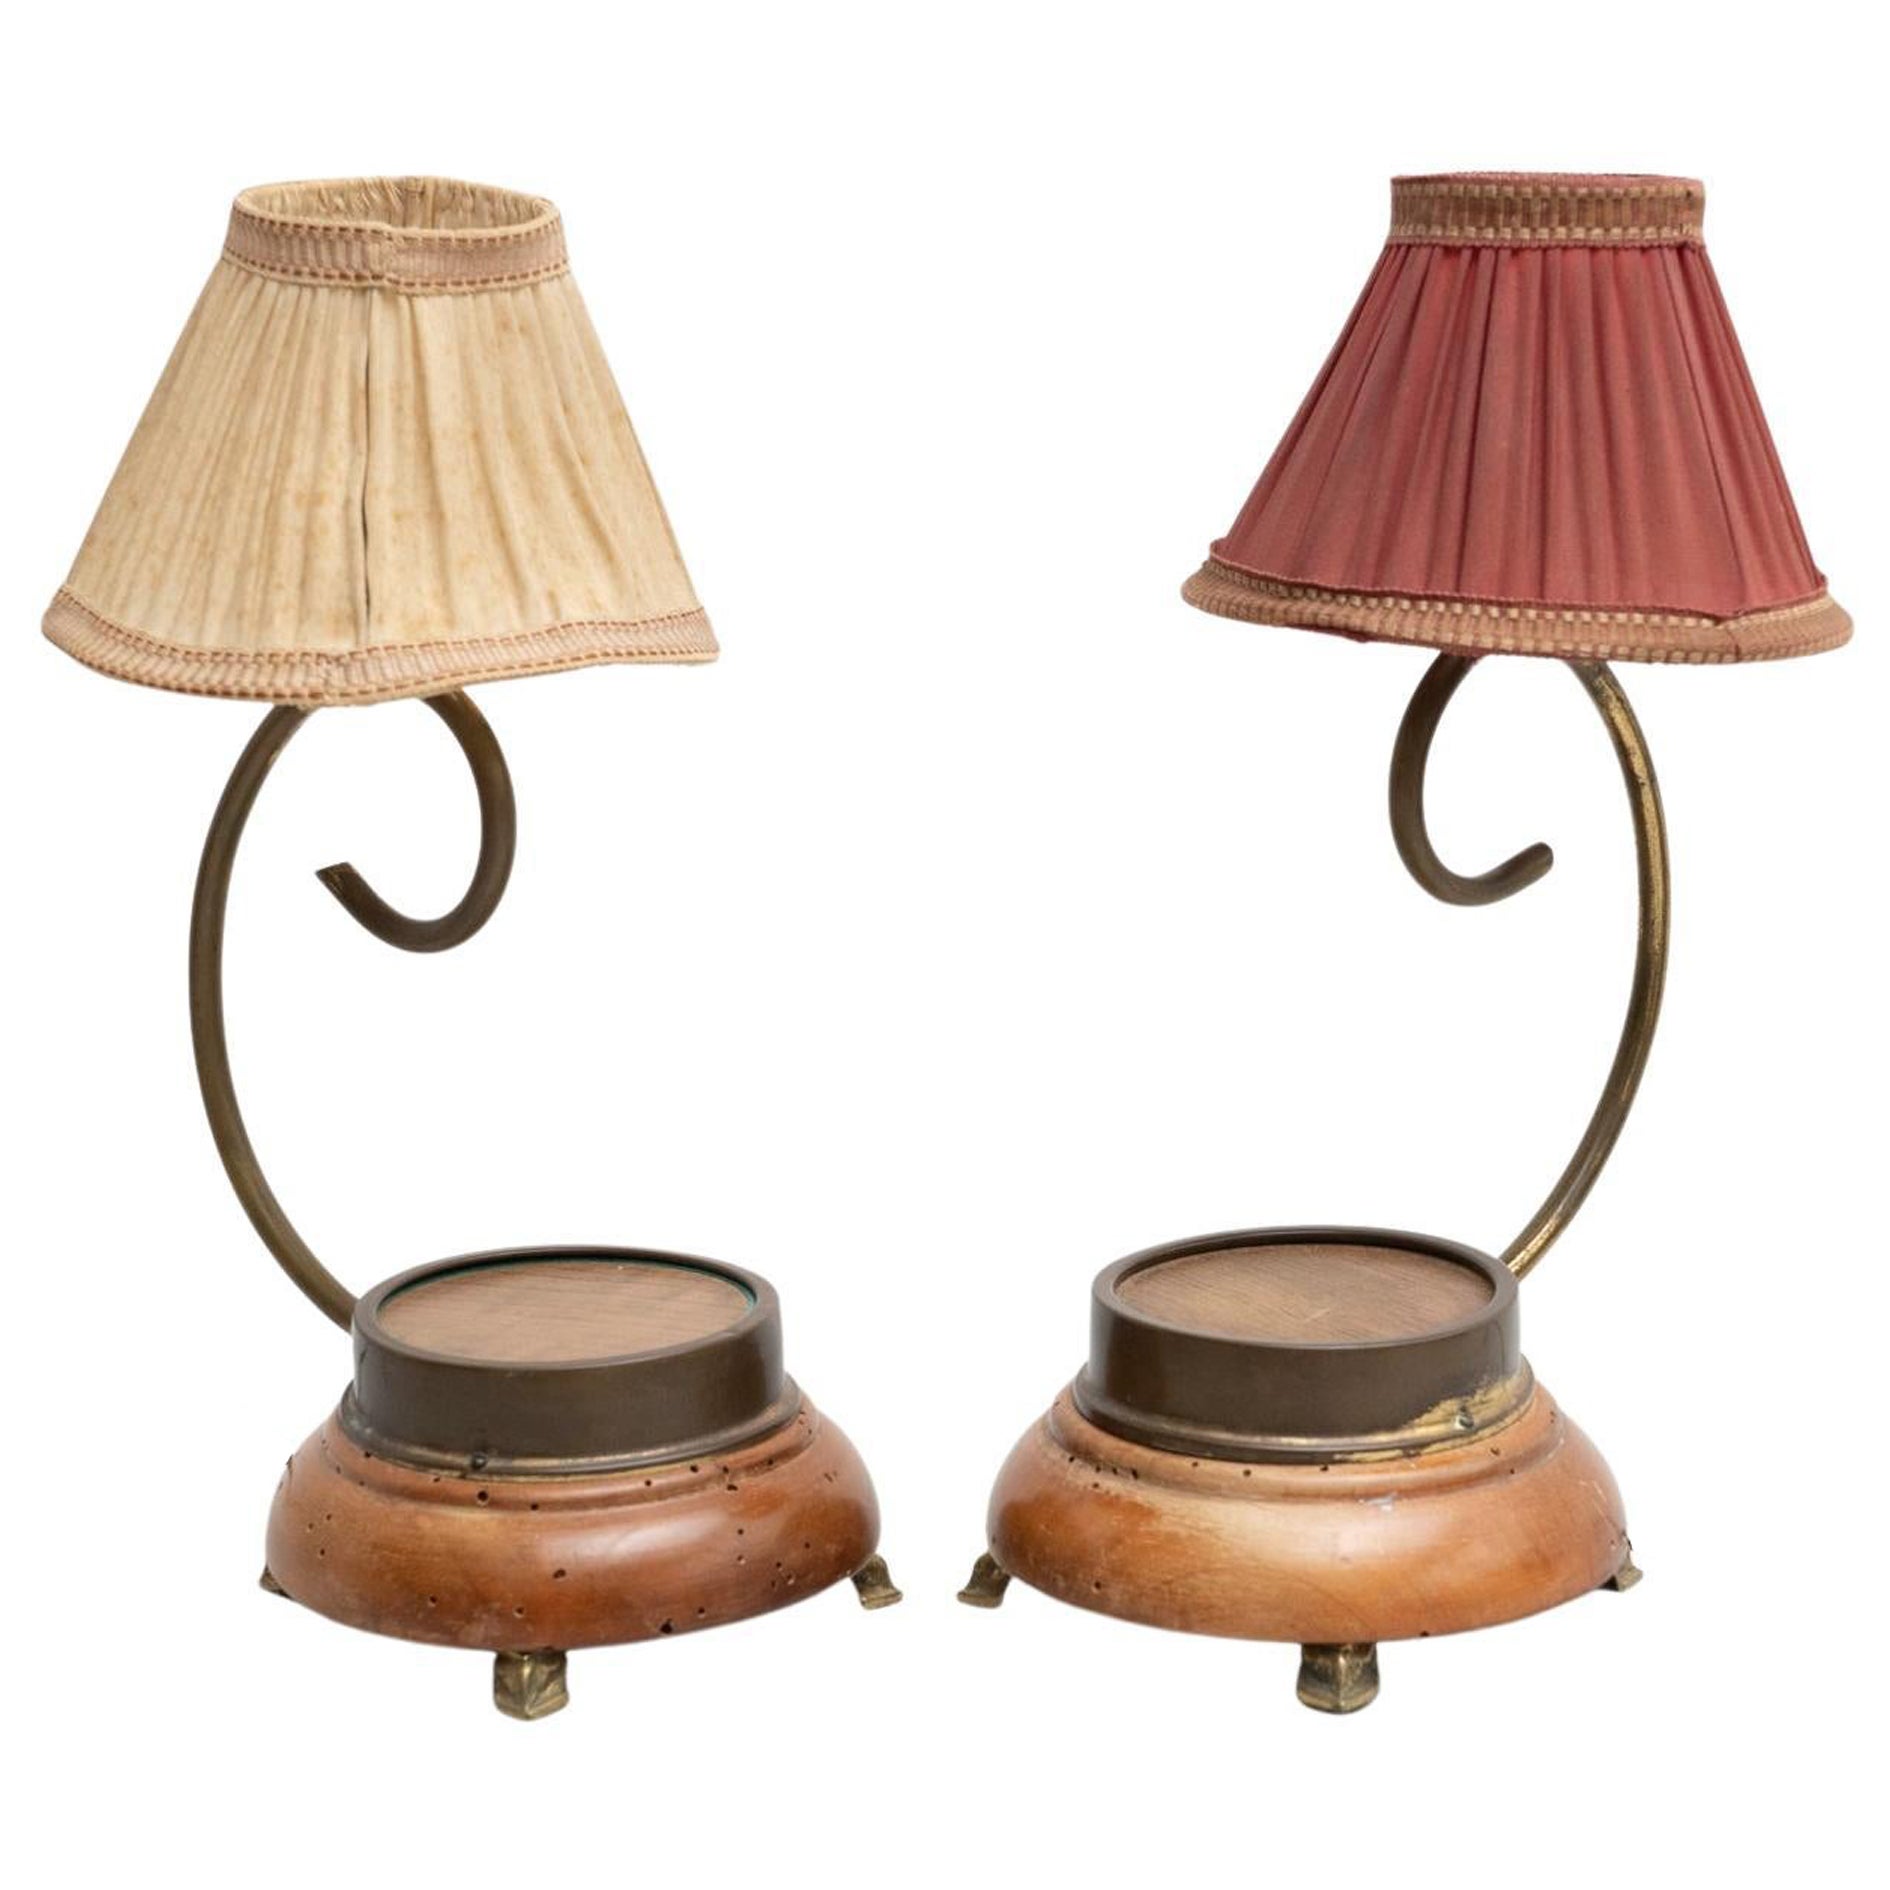 Set of Two Early 20th Century Metal and Wood Table Lamp